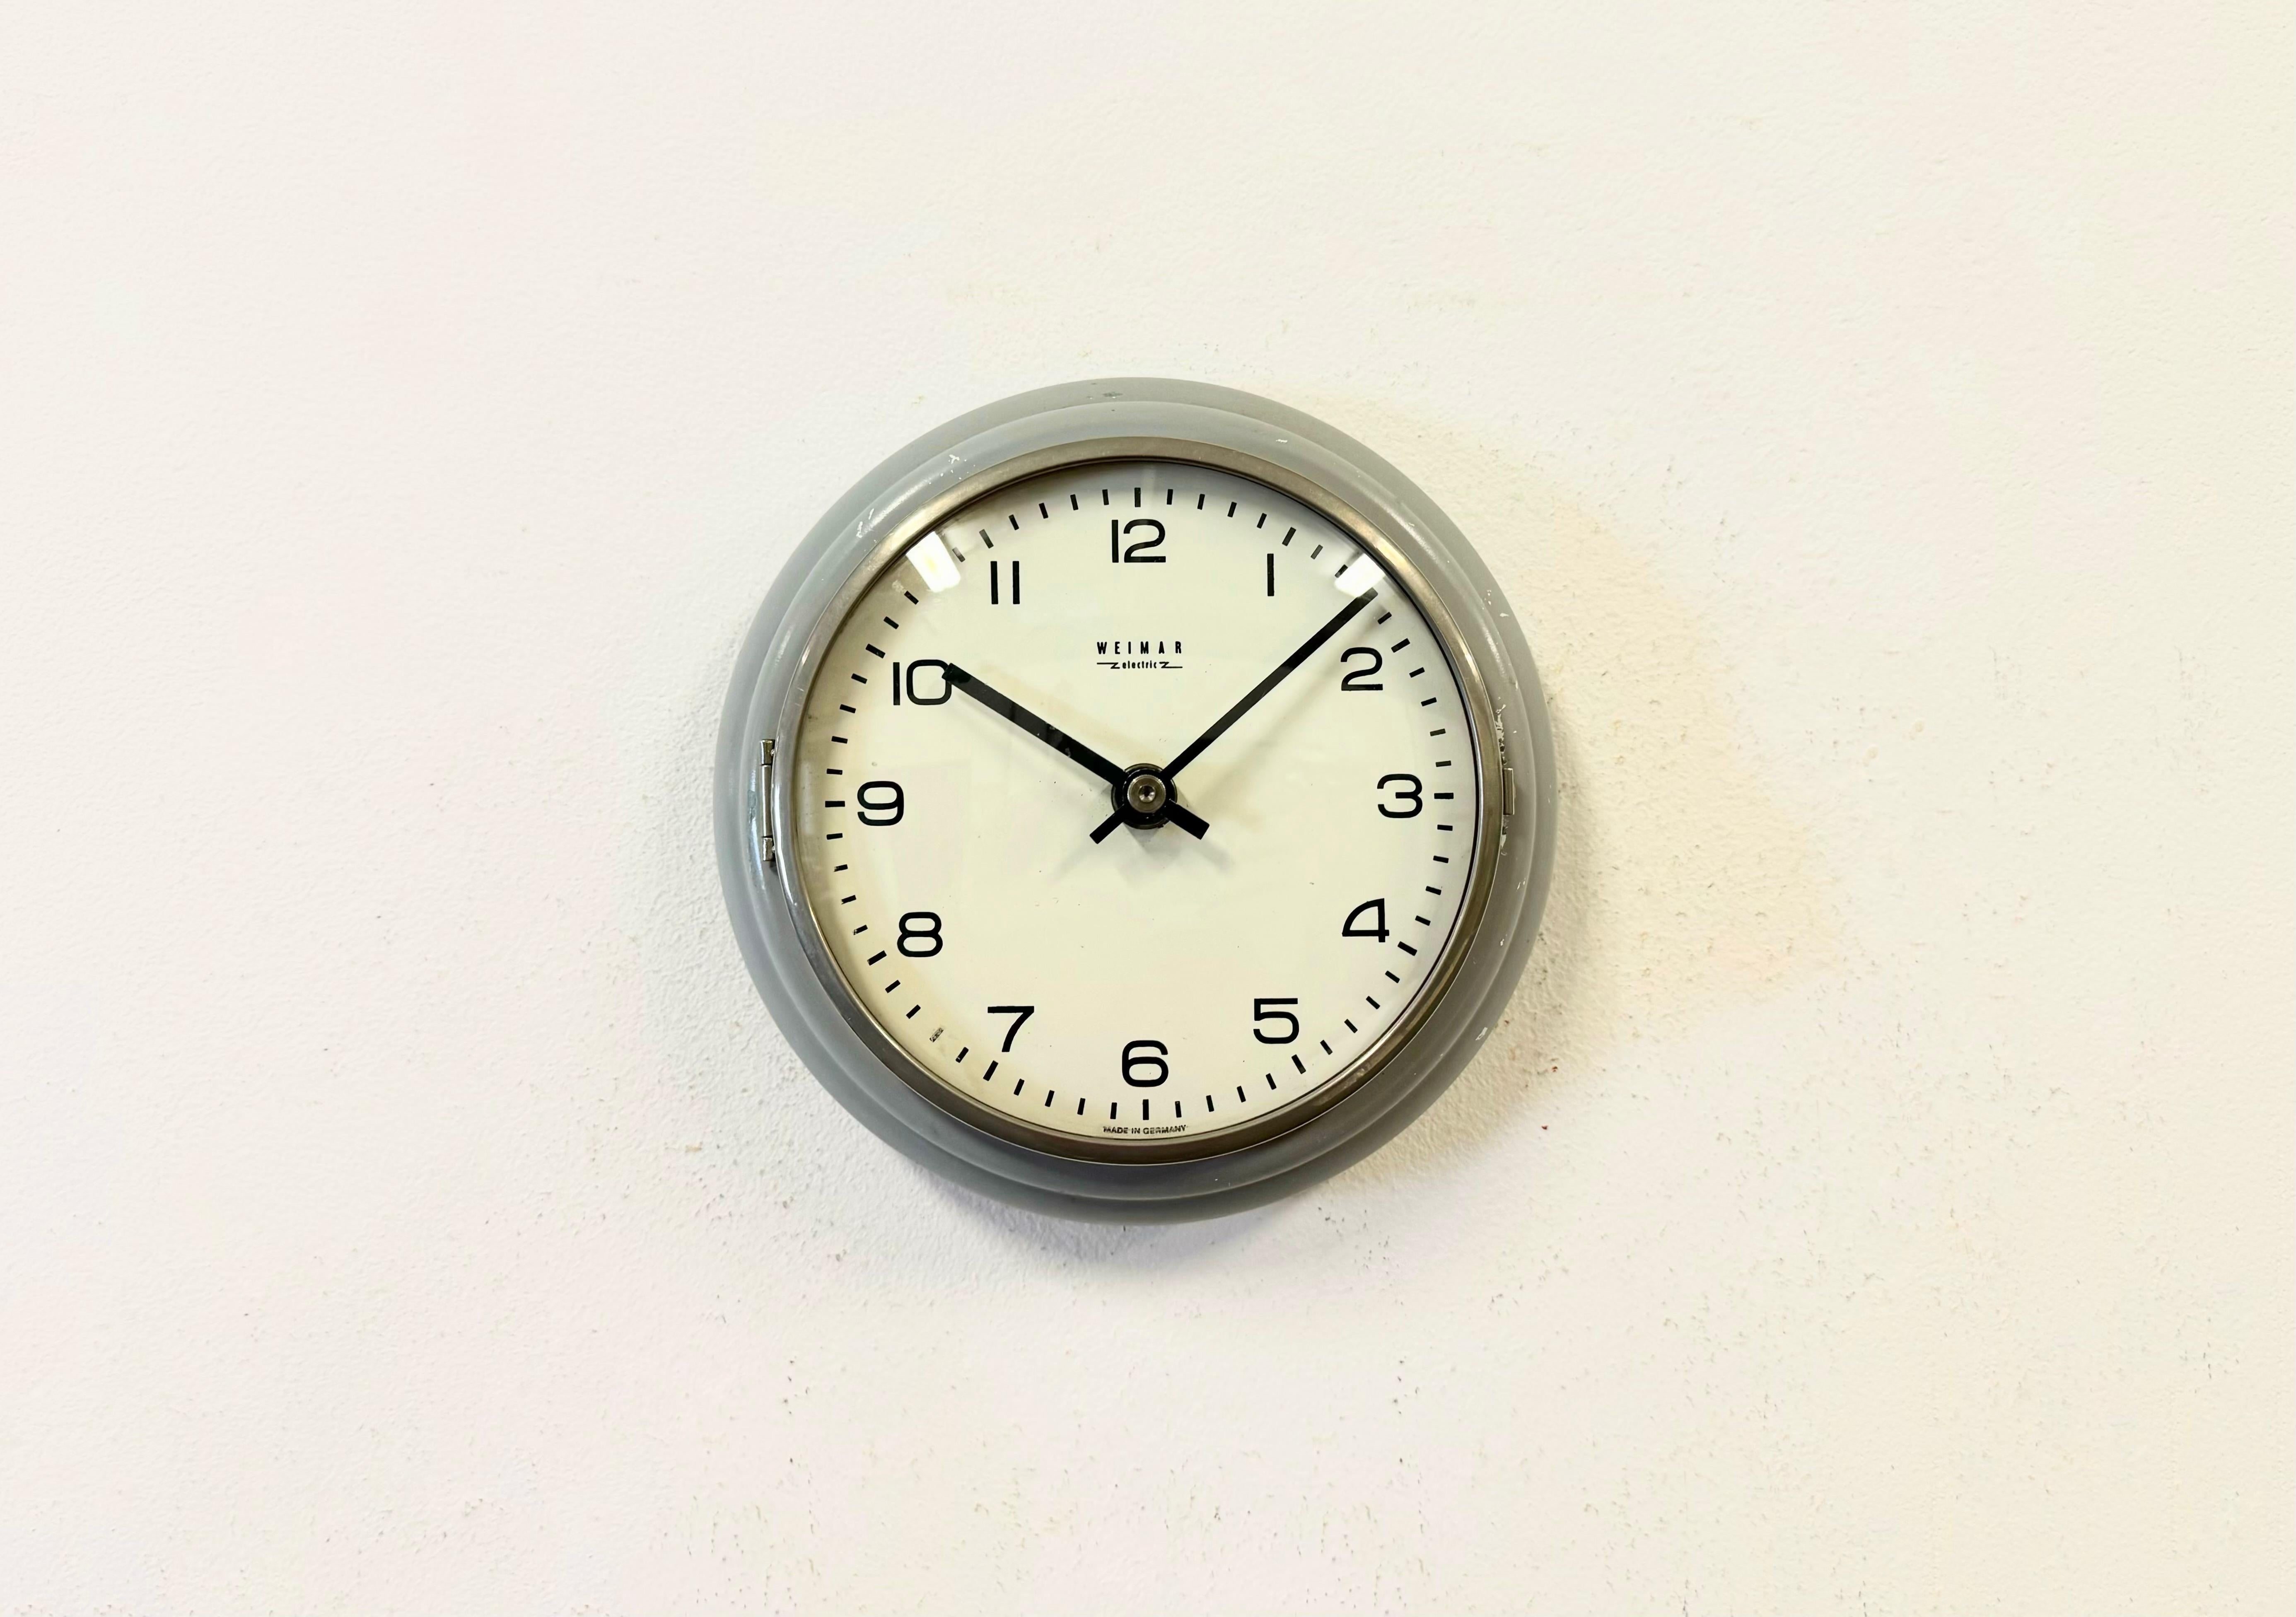 Vintage Industrial wall clock produced by Weimar Electric in former East Germany during the 1970s. It features a grey iron frame, a metal dial, an aluminium hands and a curved clear glass cover. The original battery-powered clockwork requires one C